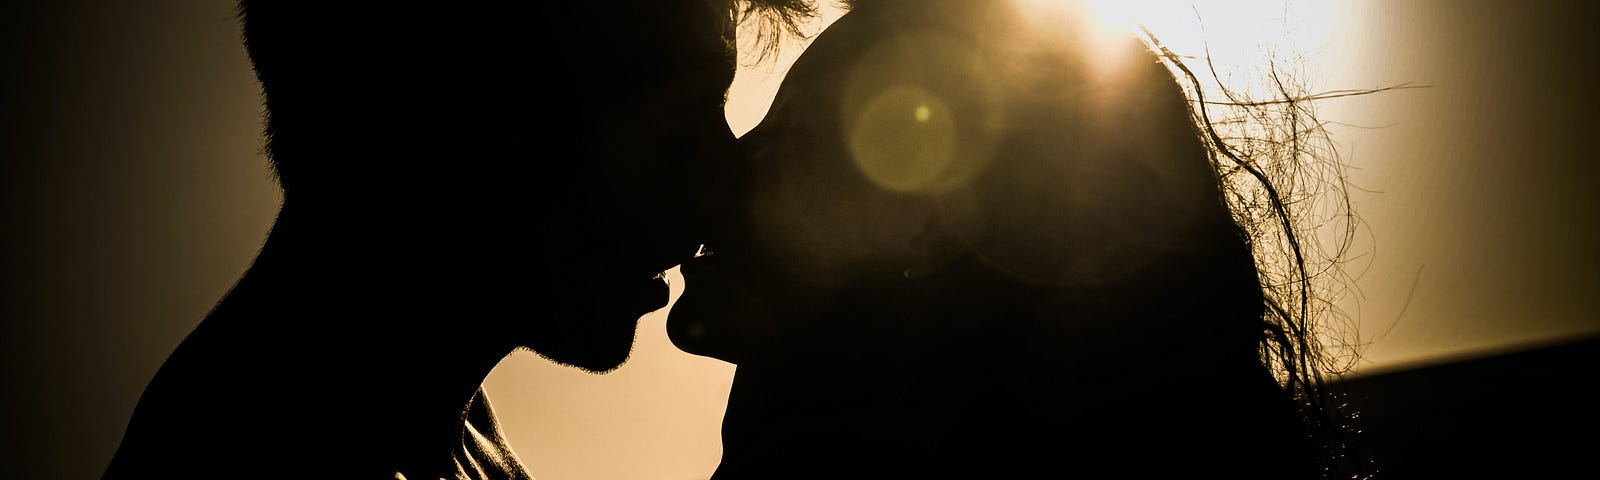 Silhouette of man and woman kissing.